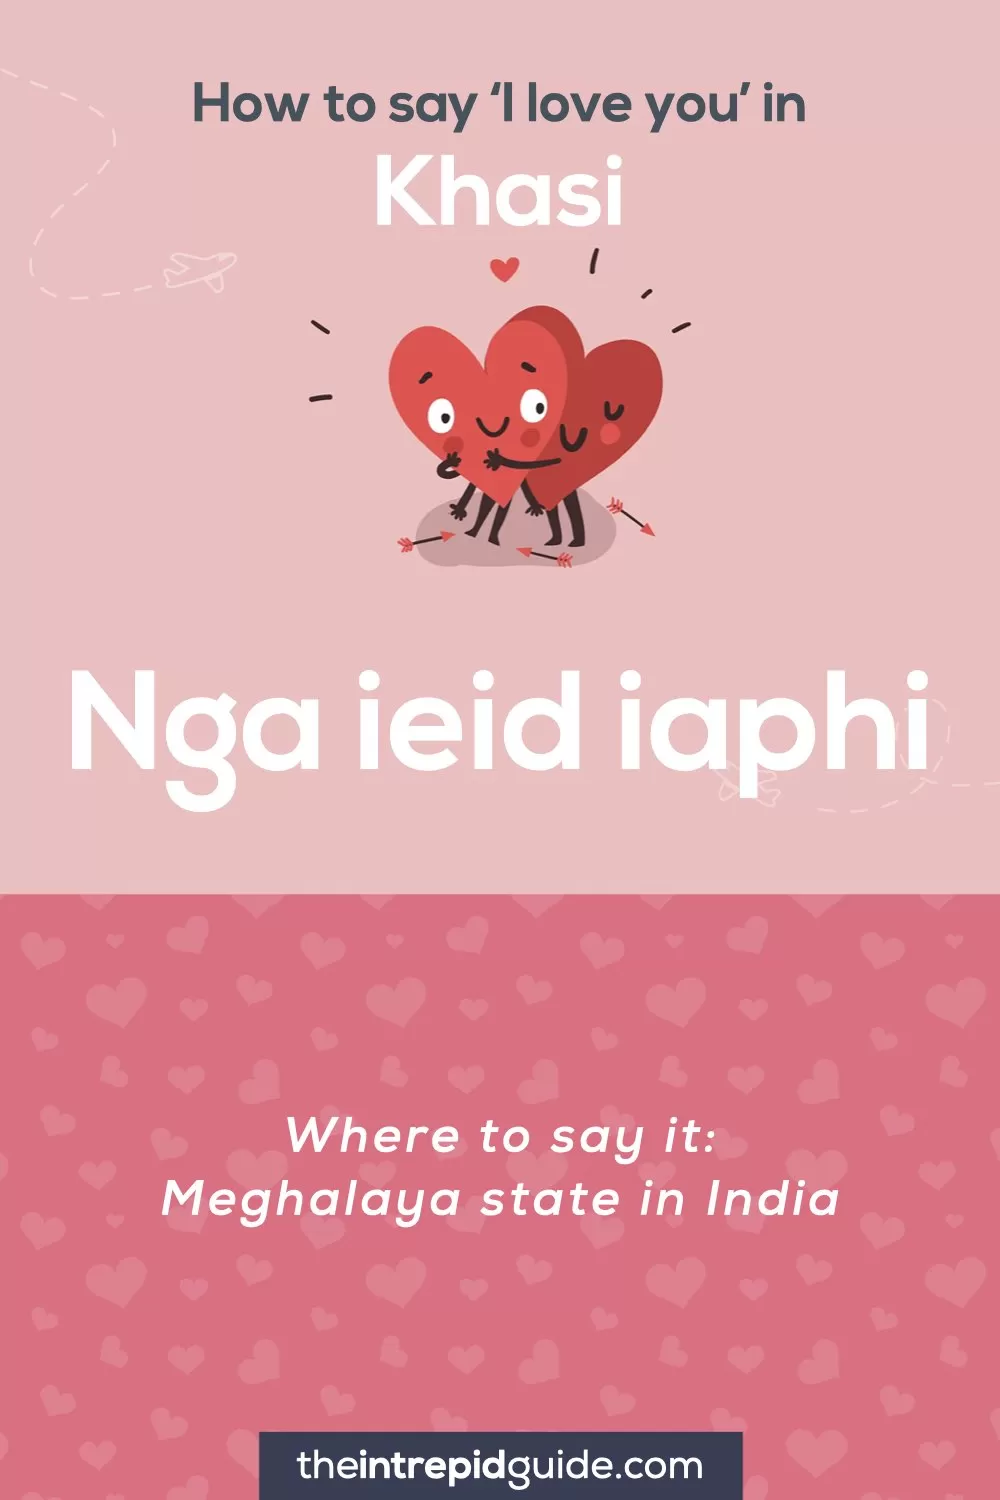 How to say I love you in different languages - Khasi - Nga ieid iaphi